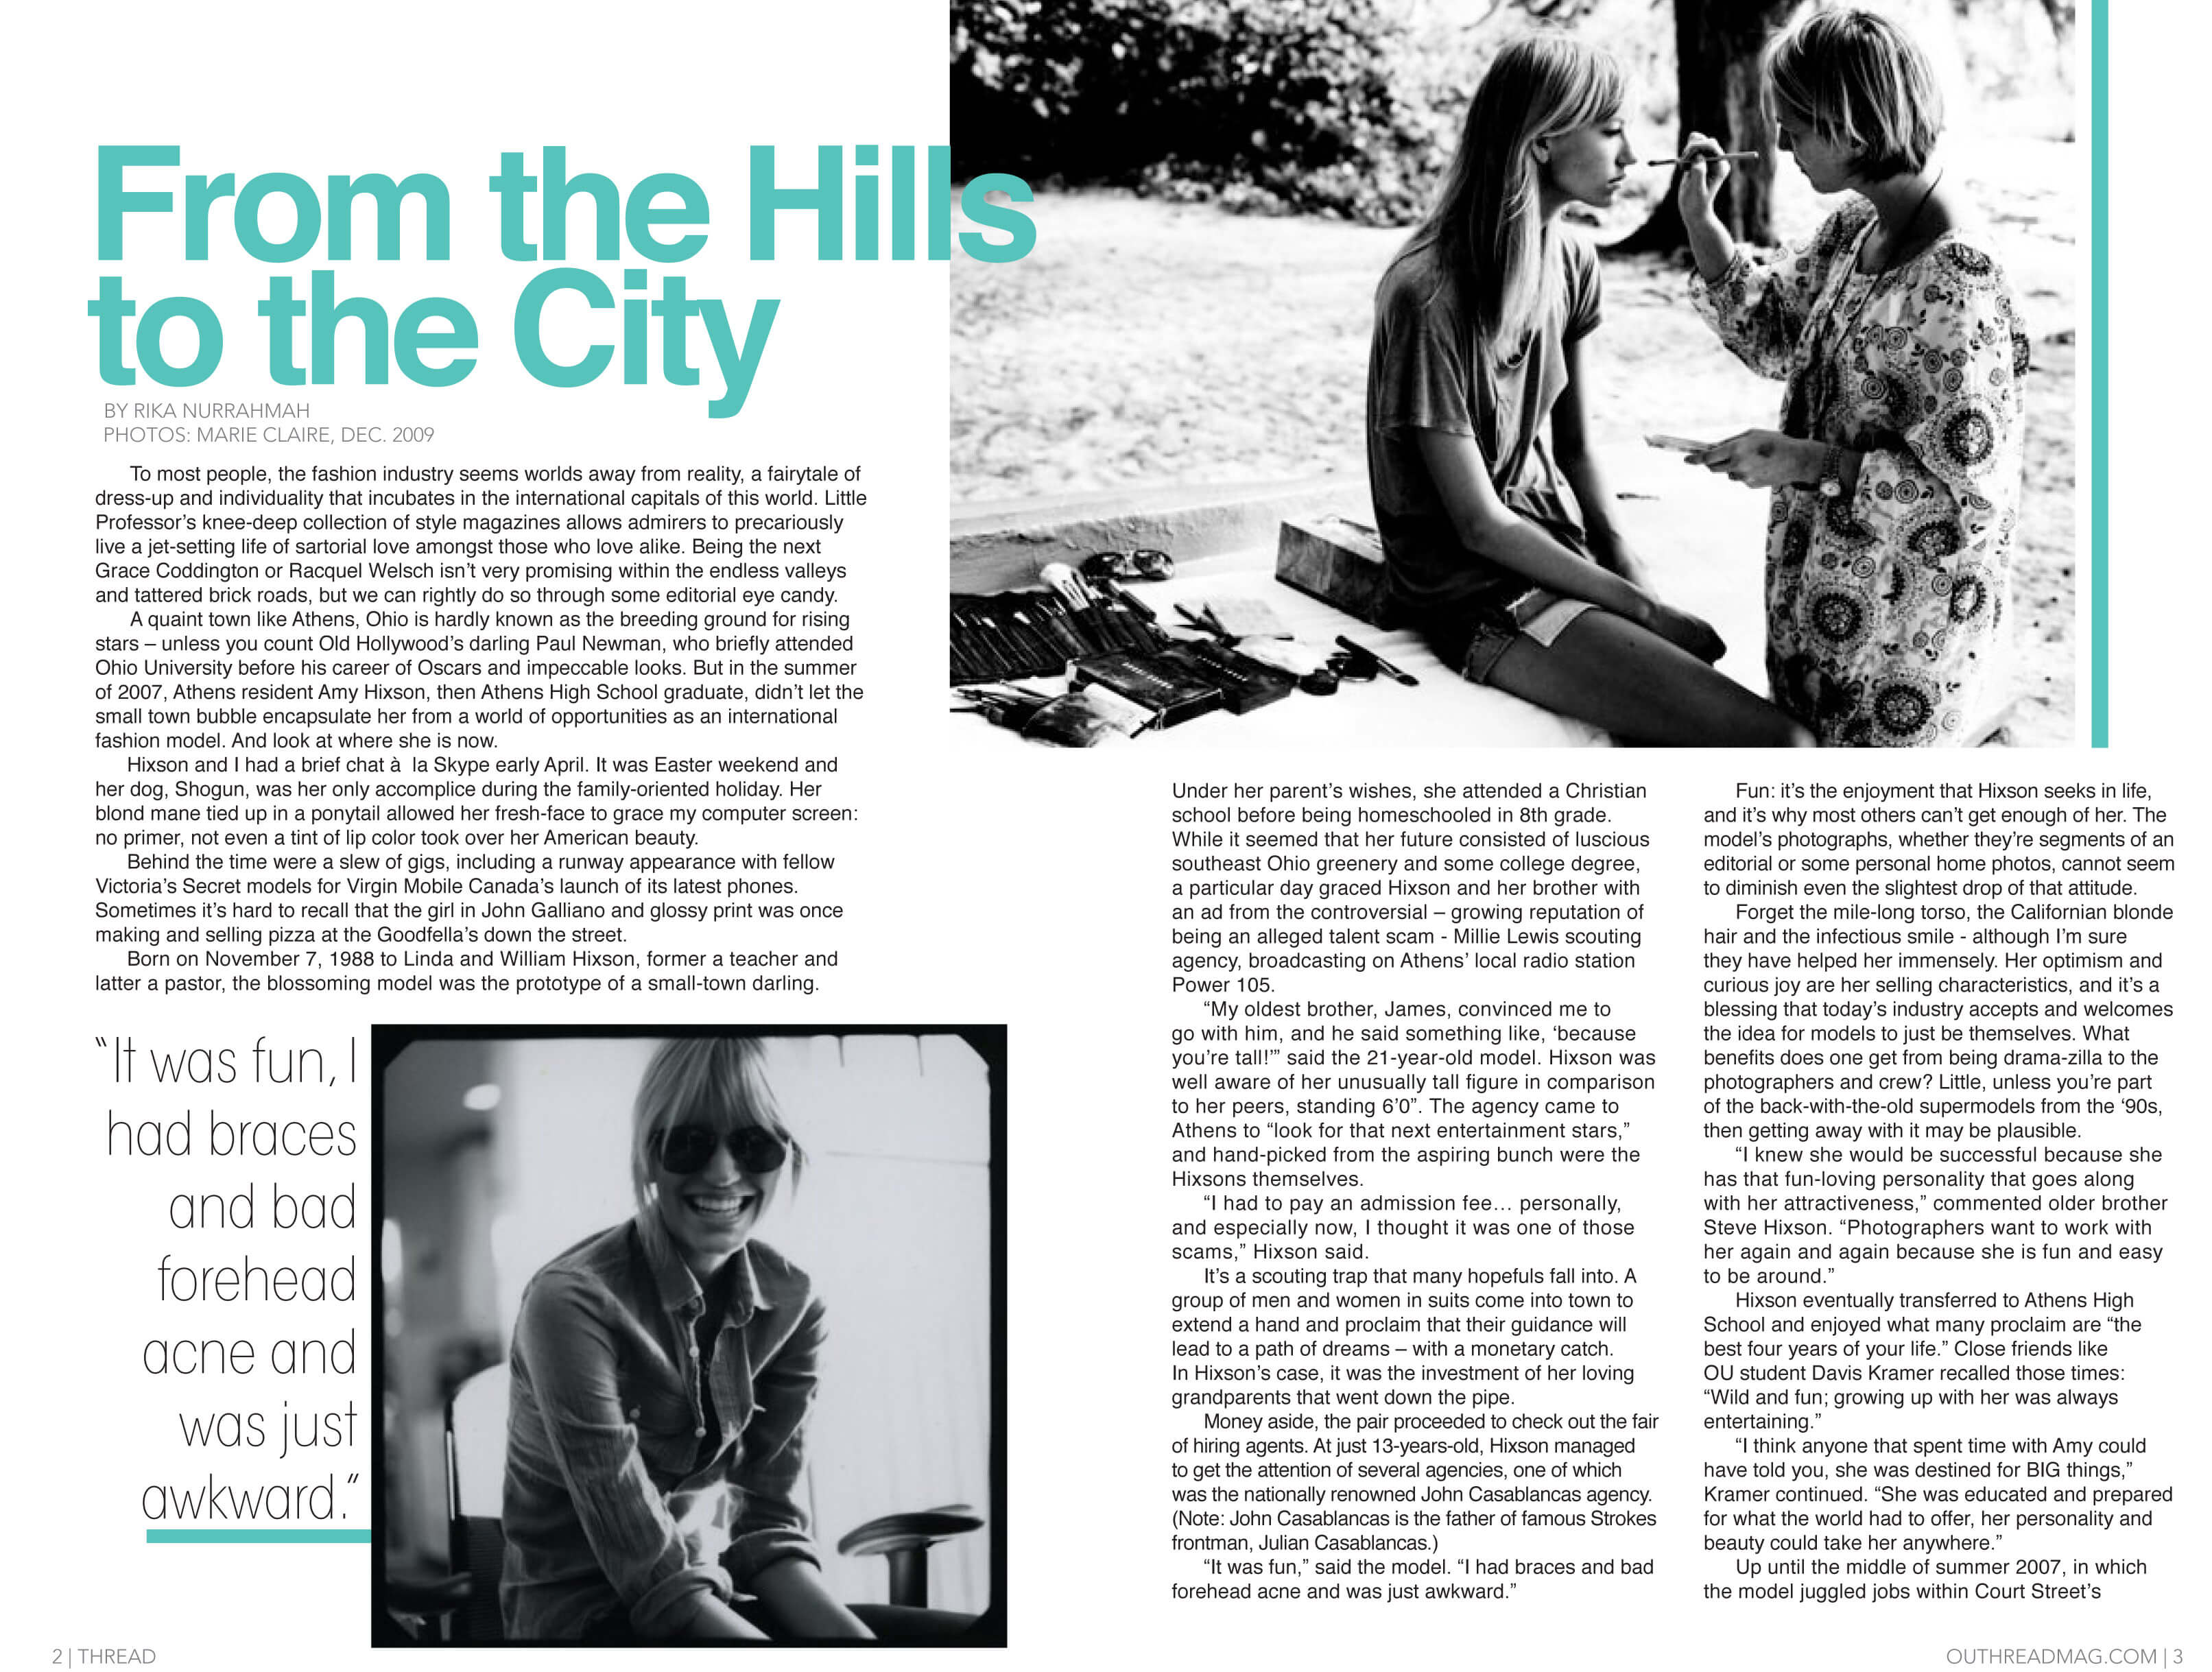 From the Hills to the City by Megan Hillman